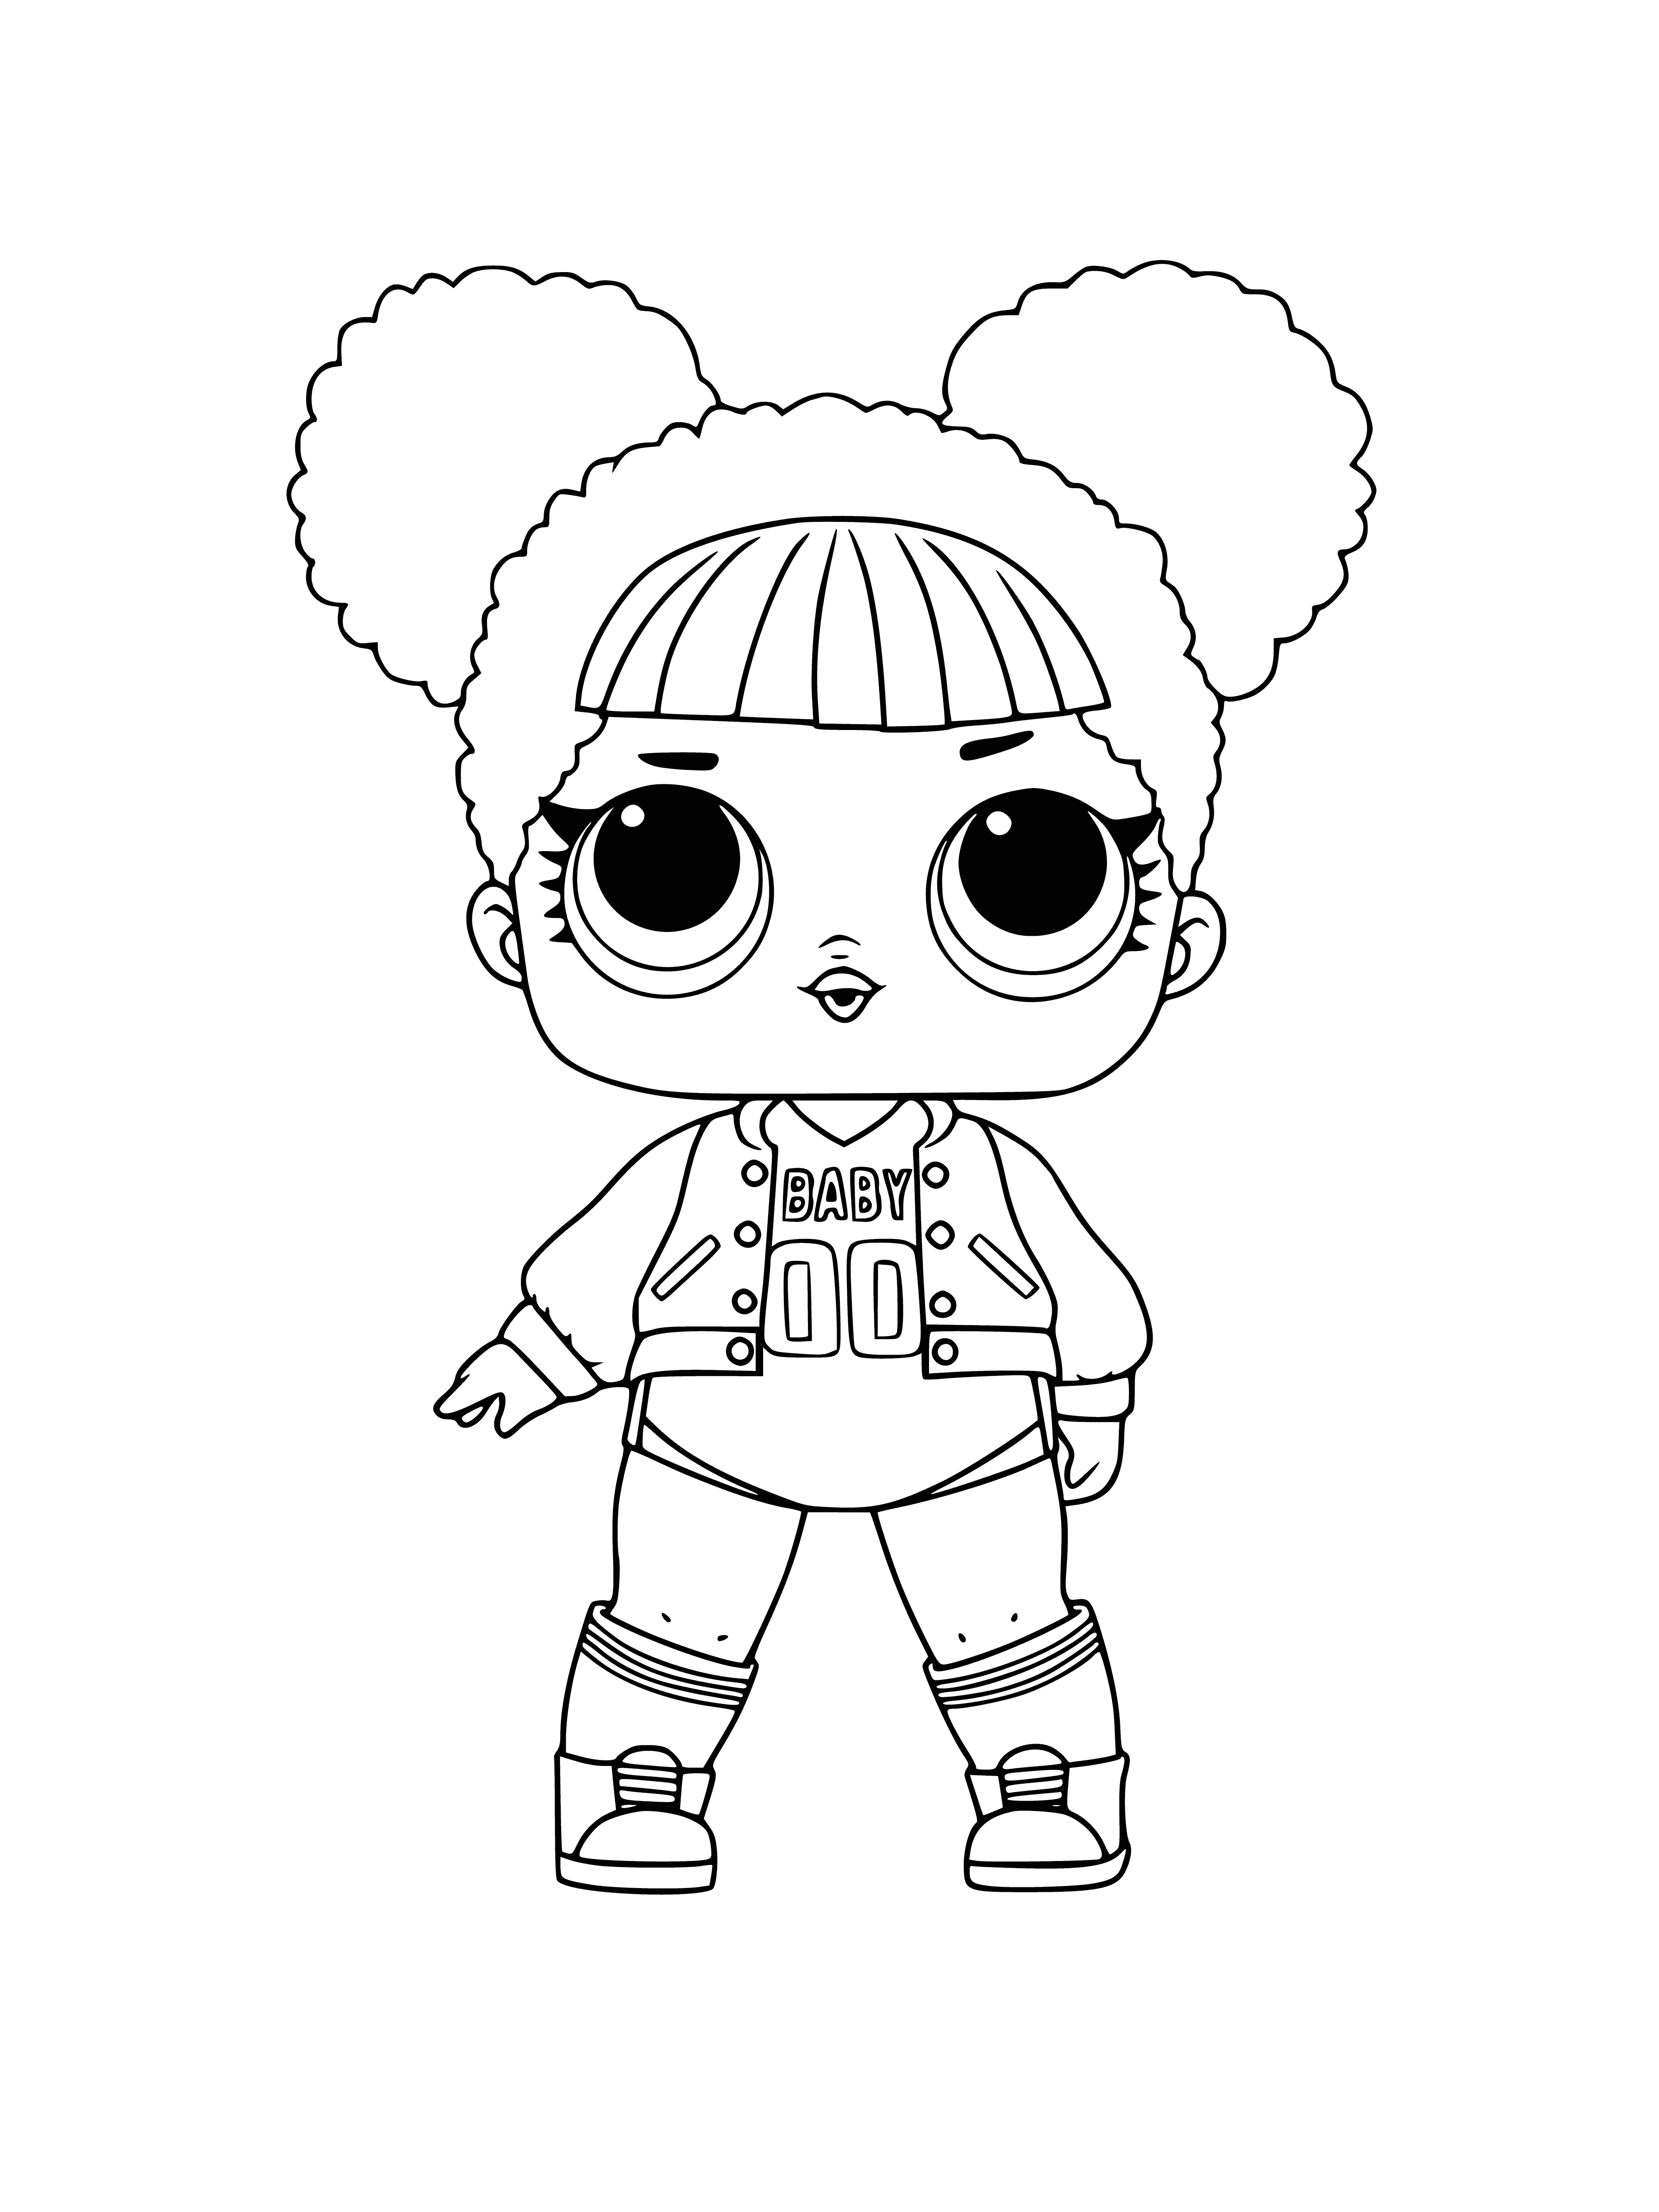 coloring page: Girl basketball player dribbling ball, wearing white "L.O.L." top, looking at hoop with determination.